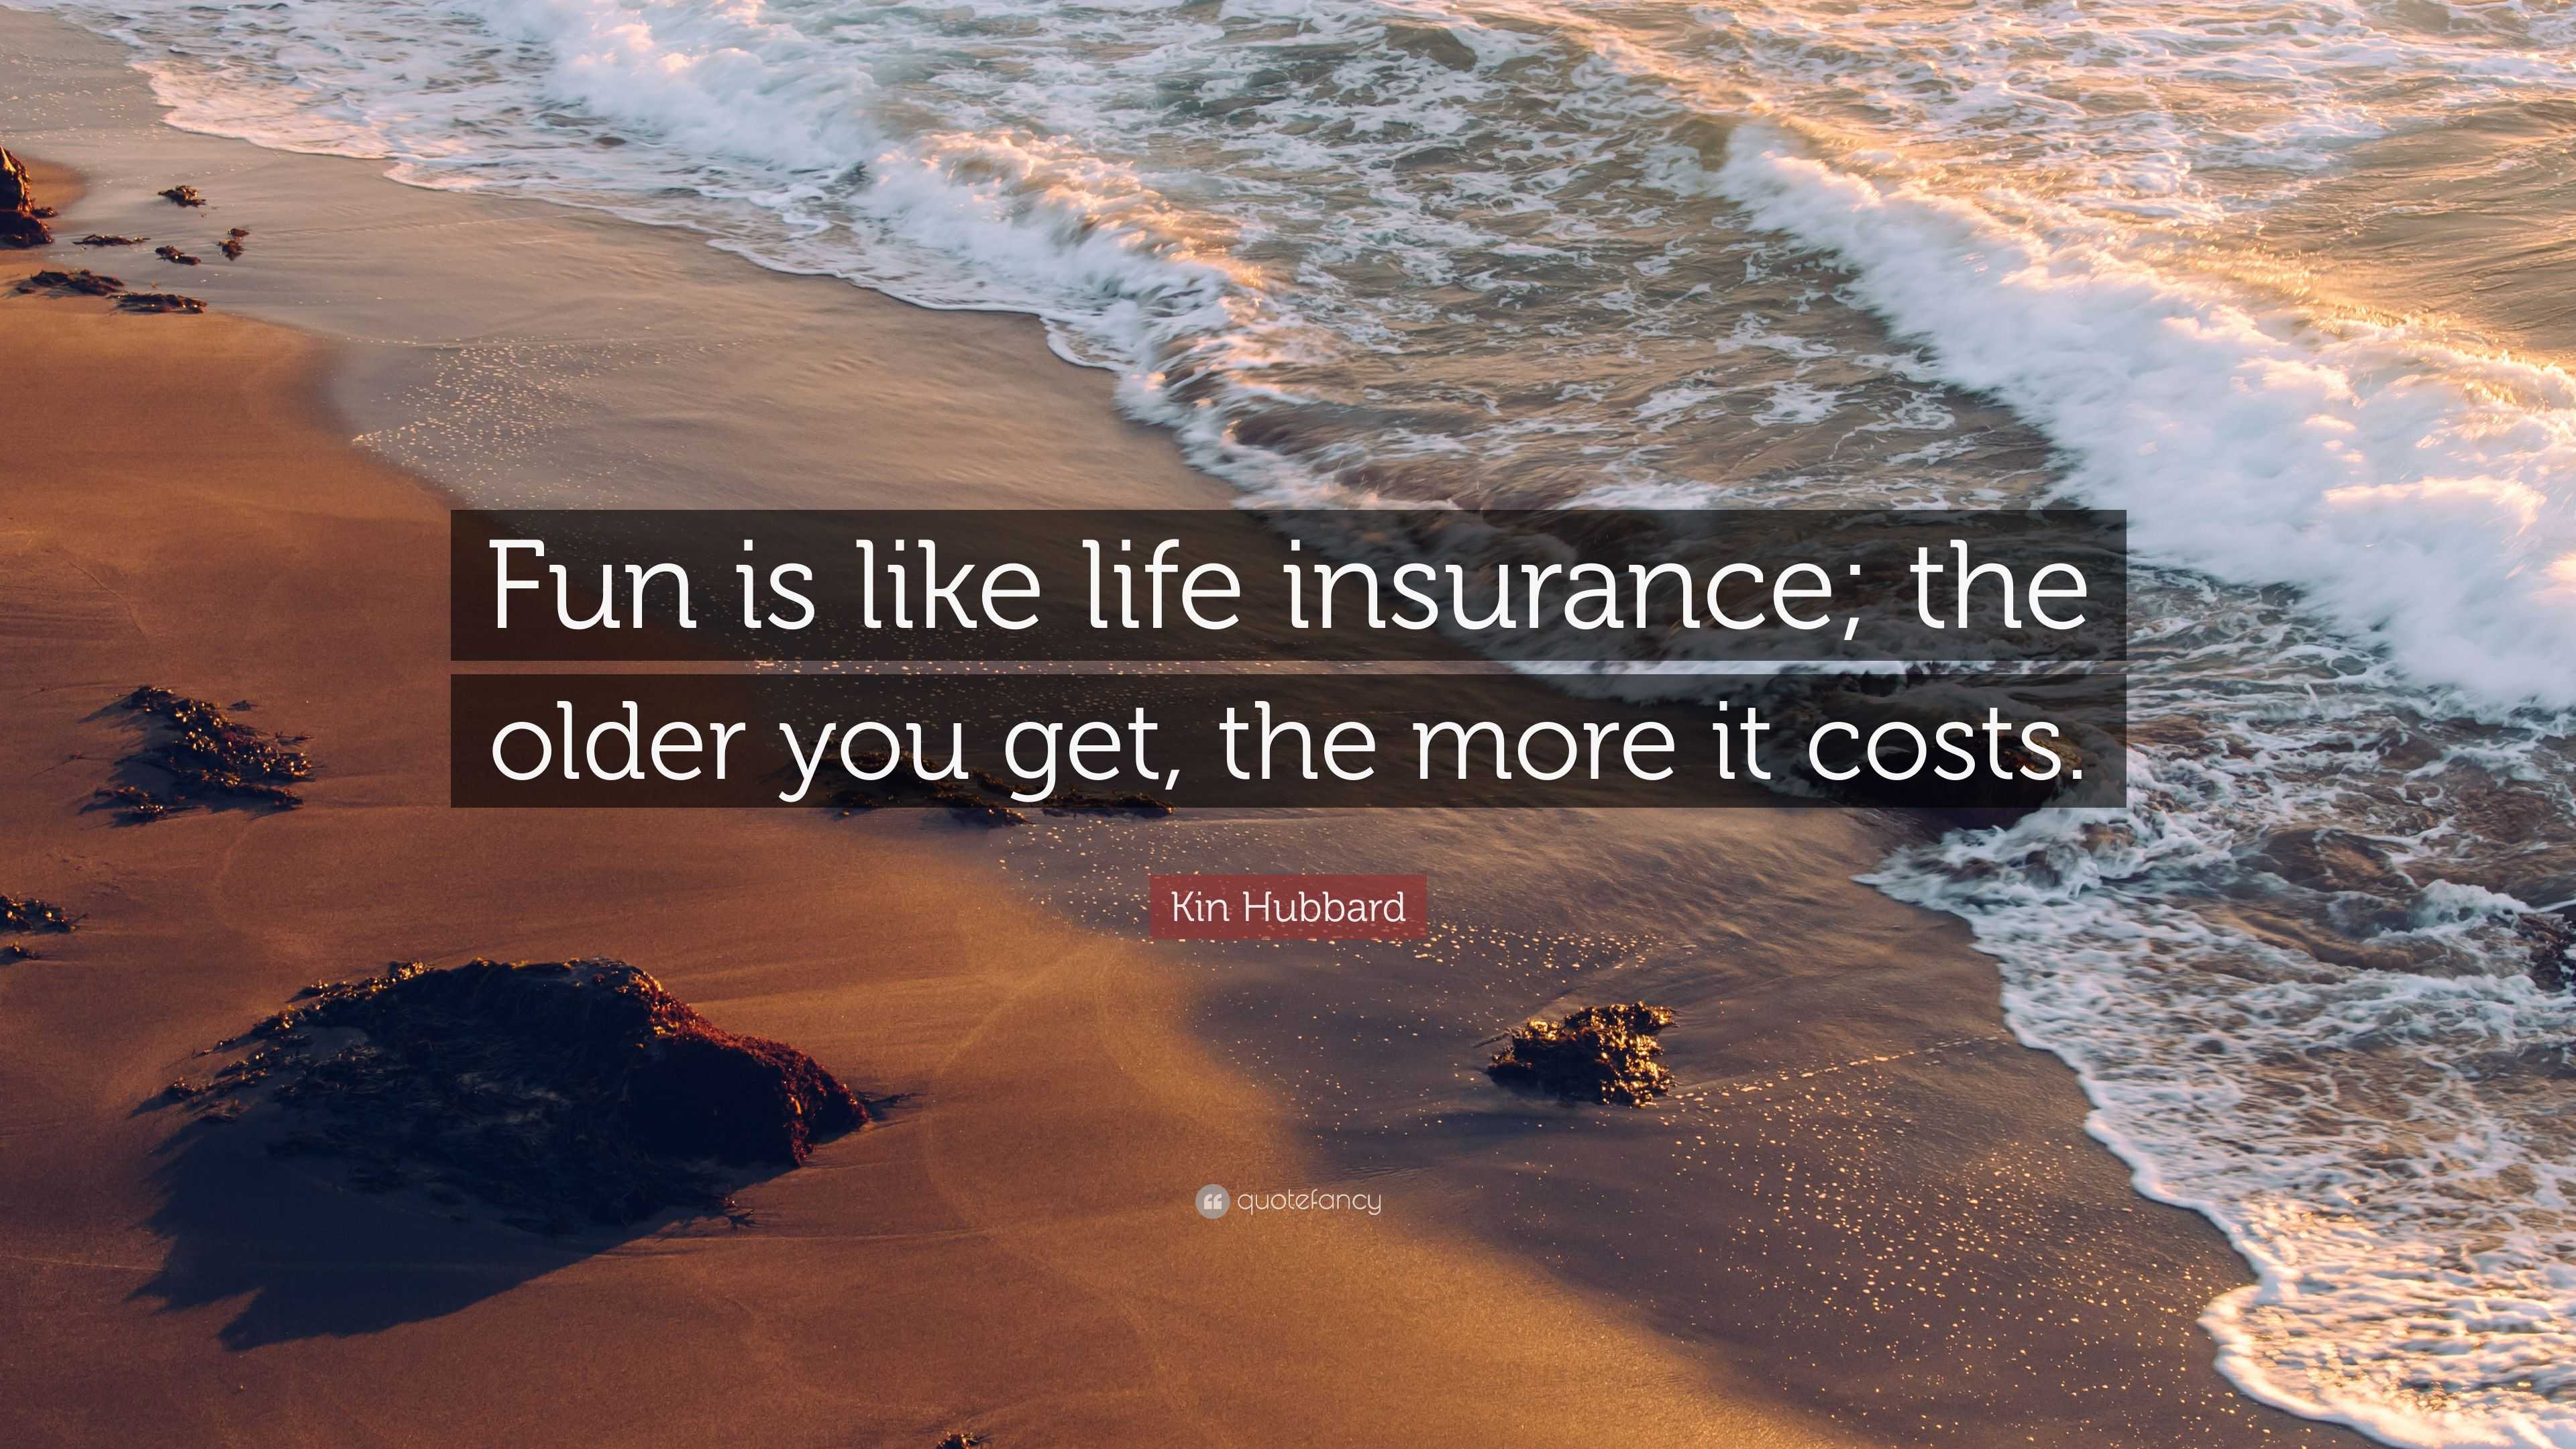 Kin Hubbard Quote: “Fun is like life insurance; the older you get, the